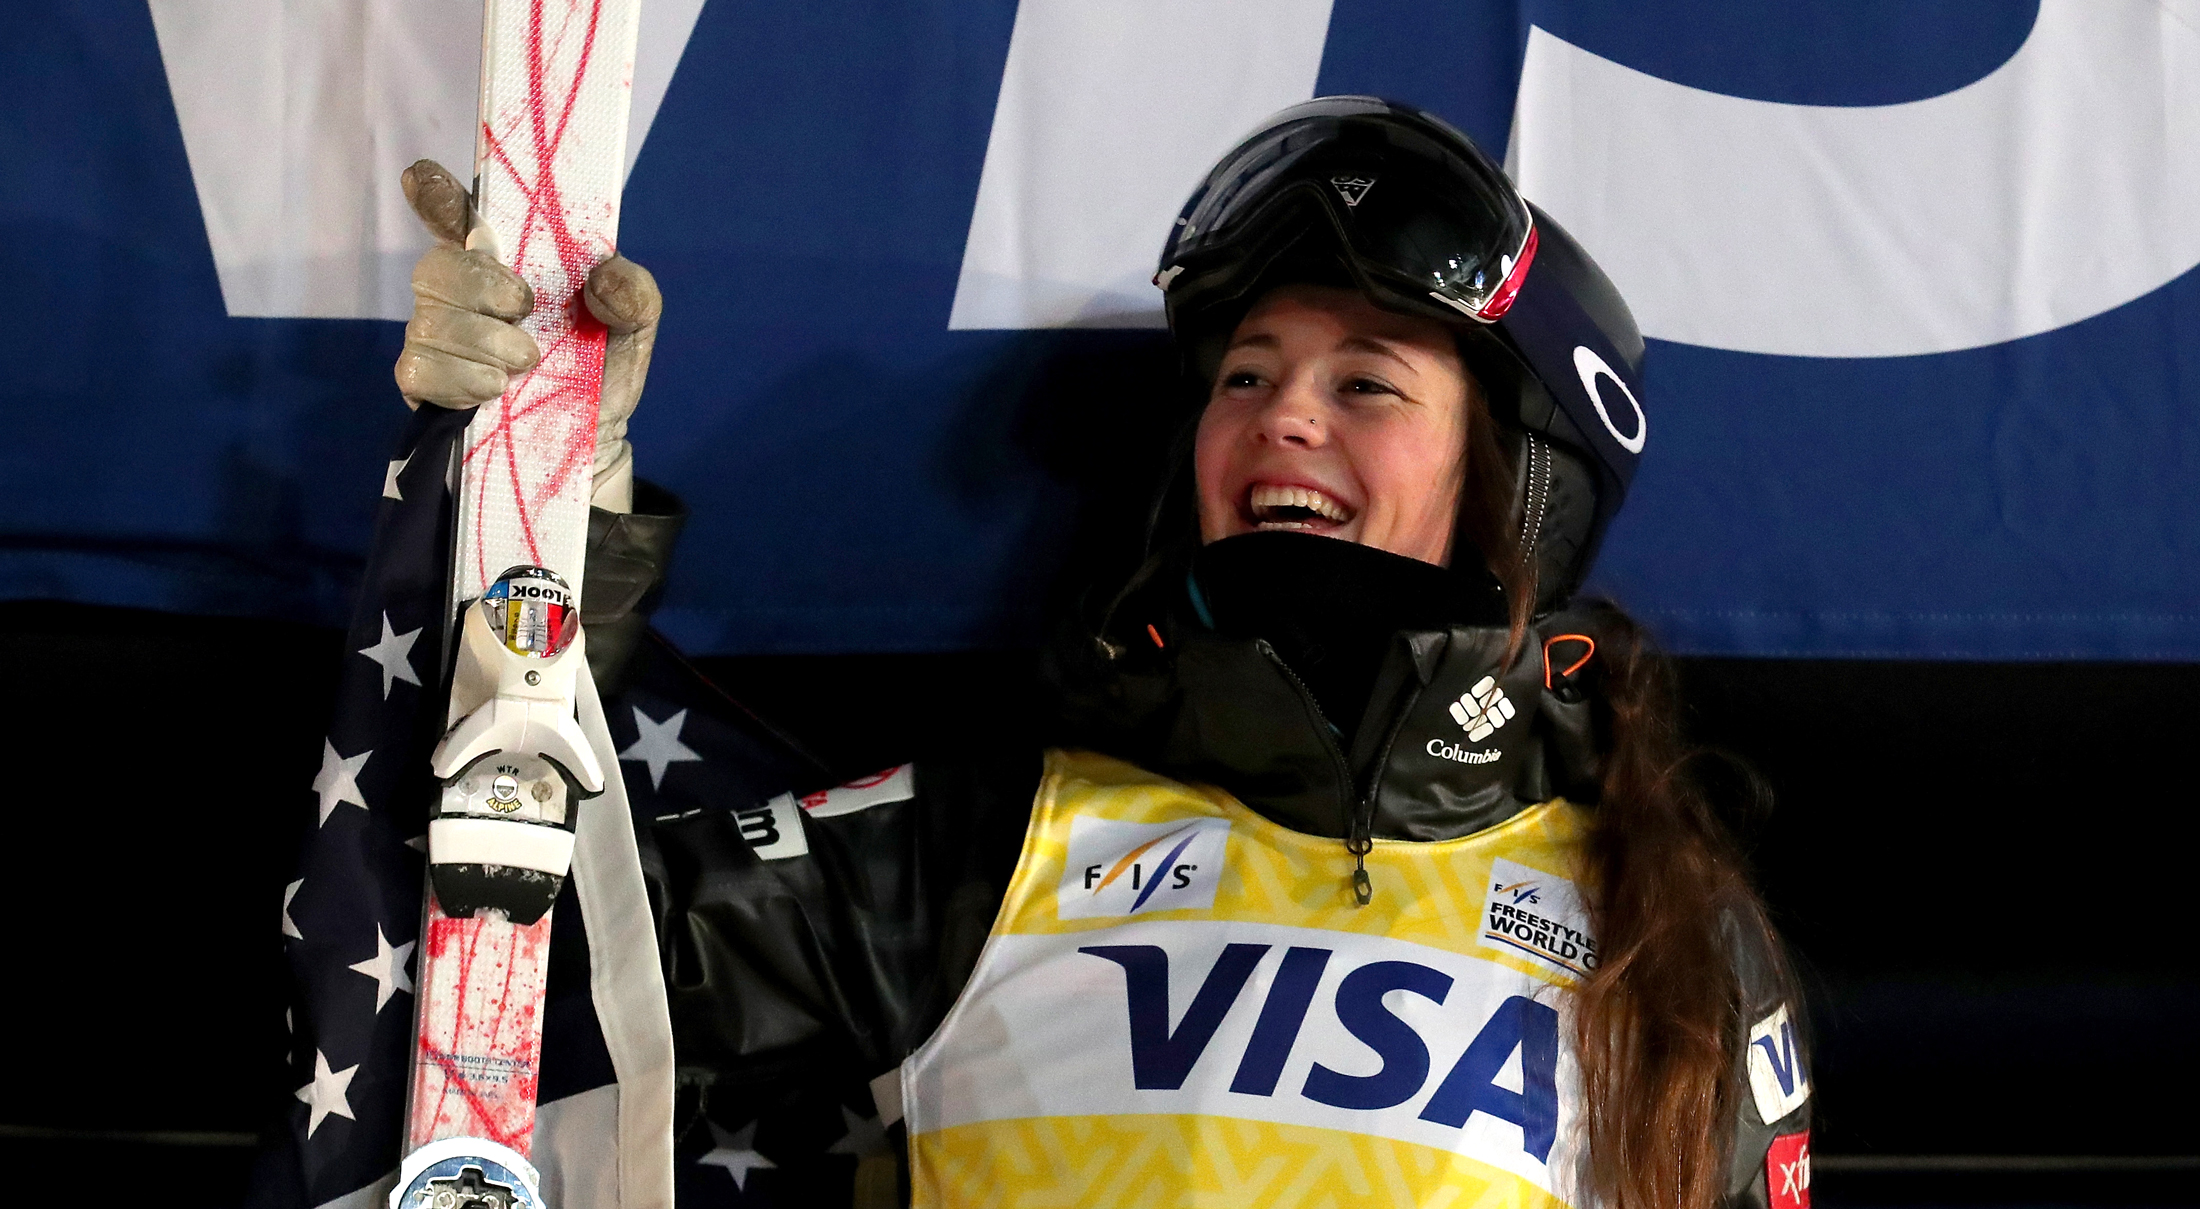 Current World Cup mogul leader Jaelin Kauf competes in Japan this weekend in moguls and dual moguls events in her quest to win the World Cup title. (Getty Images - Tom Pennington)